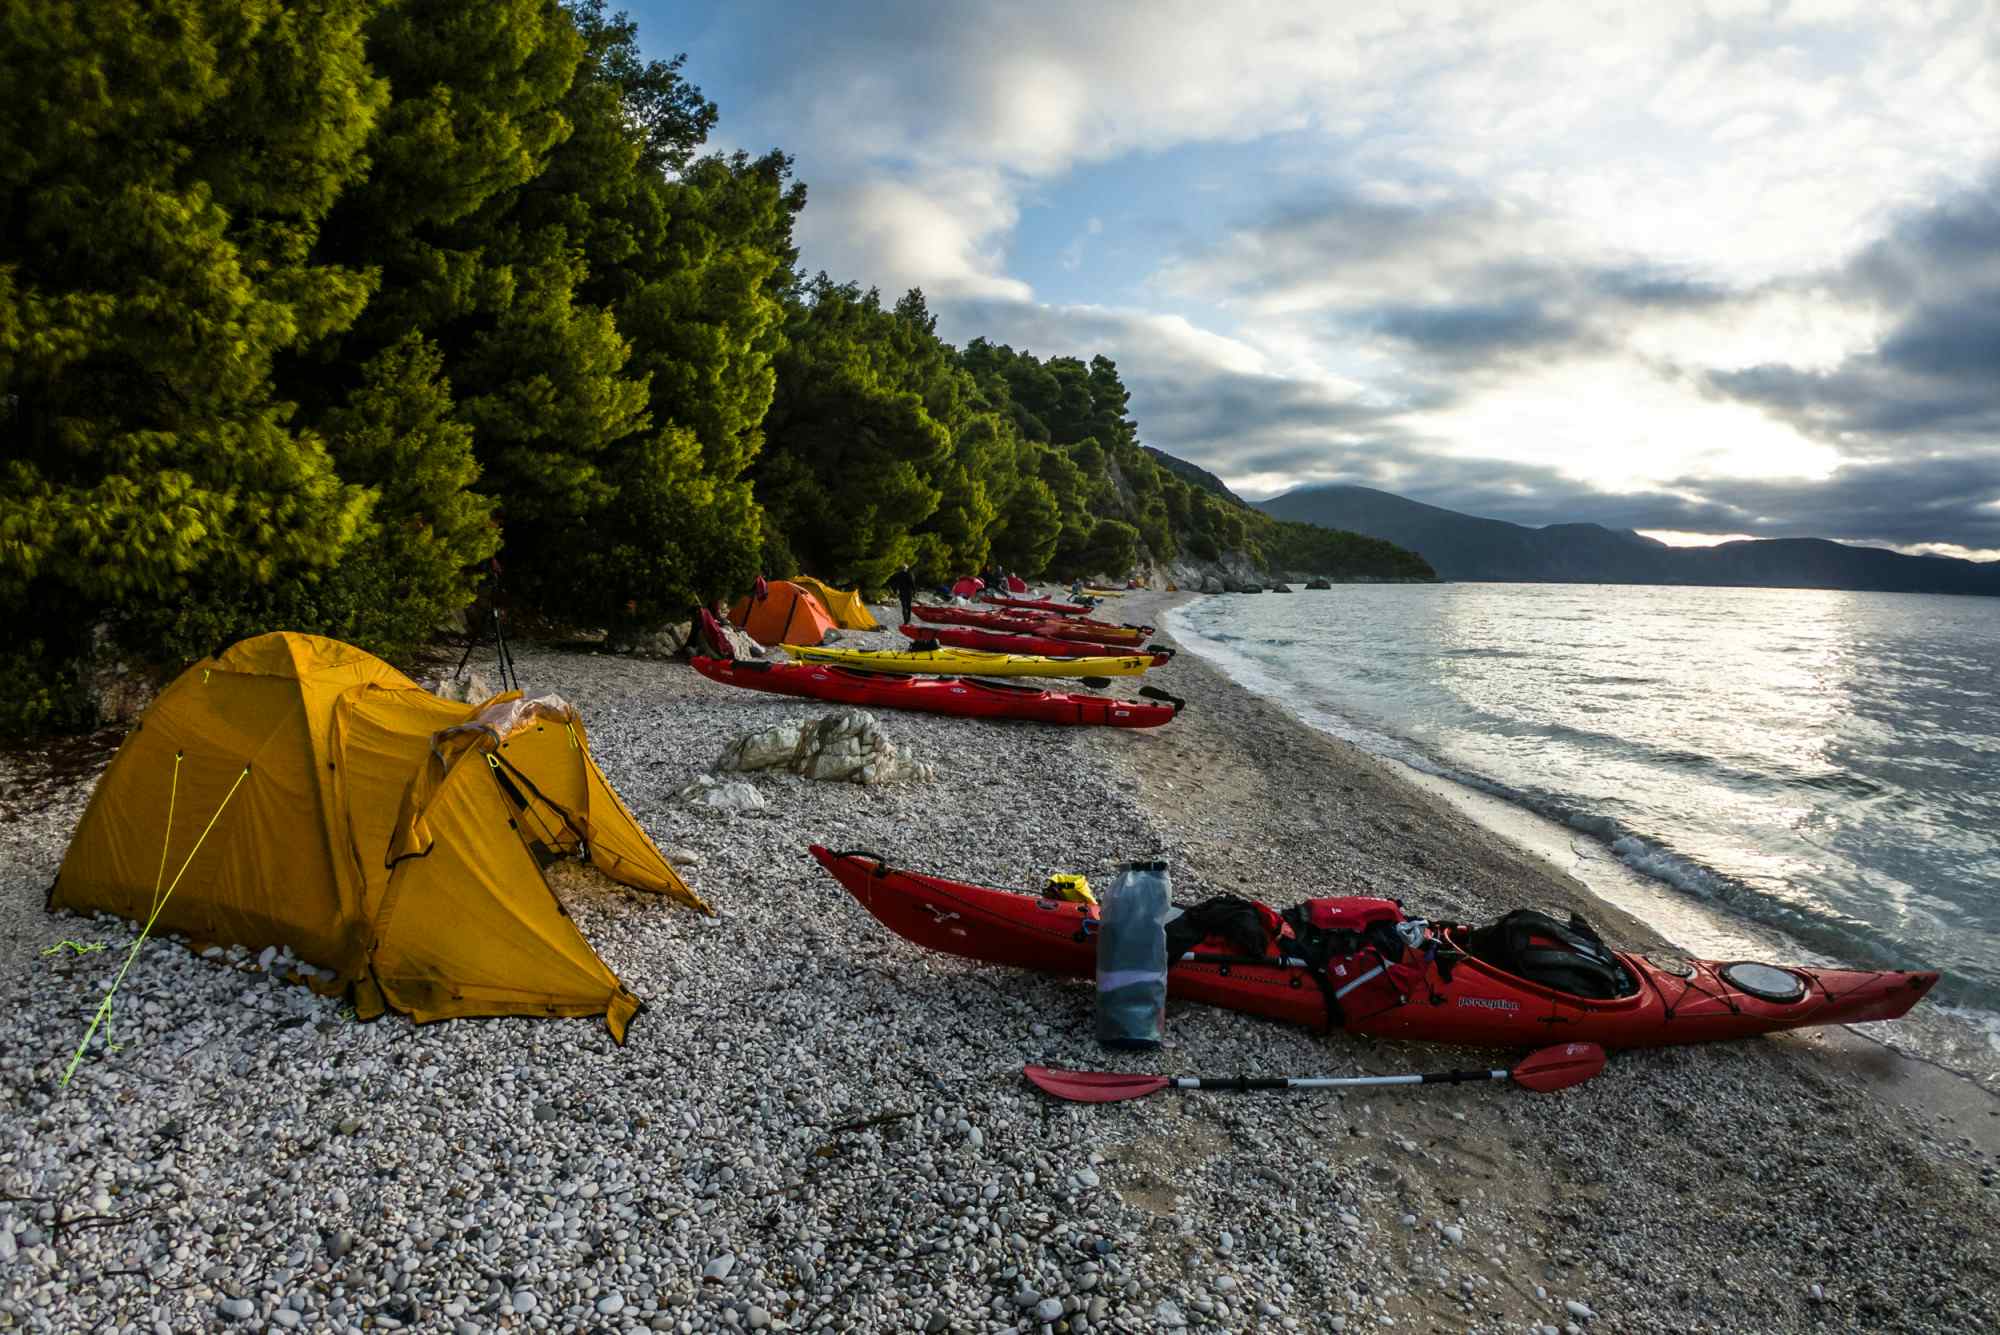 Wild beach camp with kayaks in the Ionian islands, Greece.